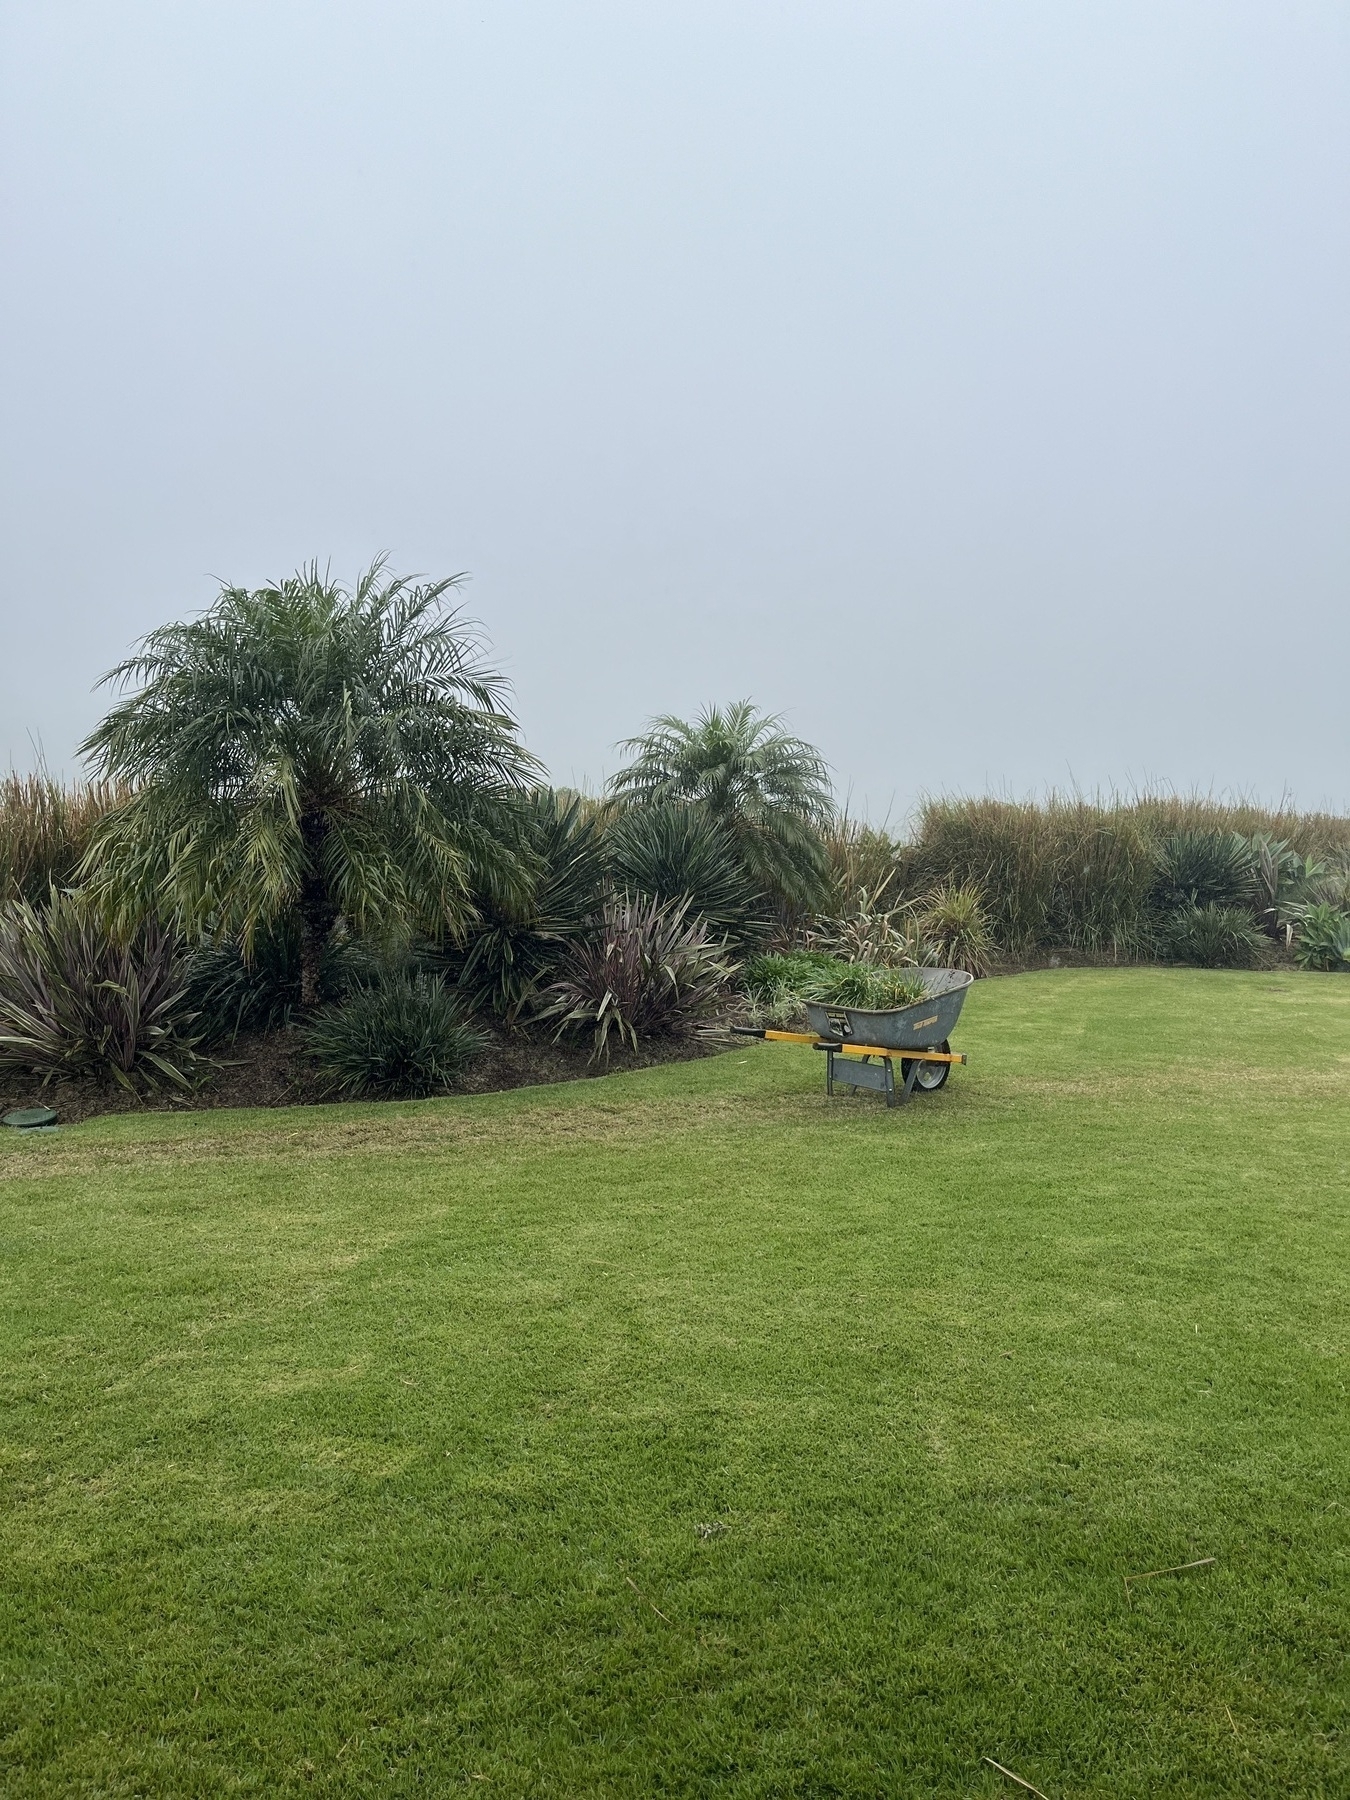 A heavily overcast sky, rain falling, a herbaceous border with a lawn in the foreground. On the lawn is a wheelbarrow with plants in it.